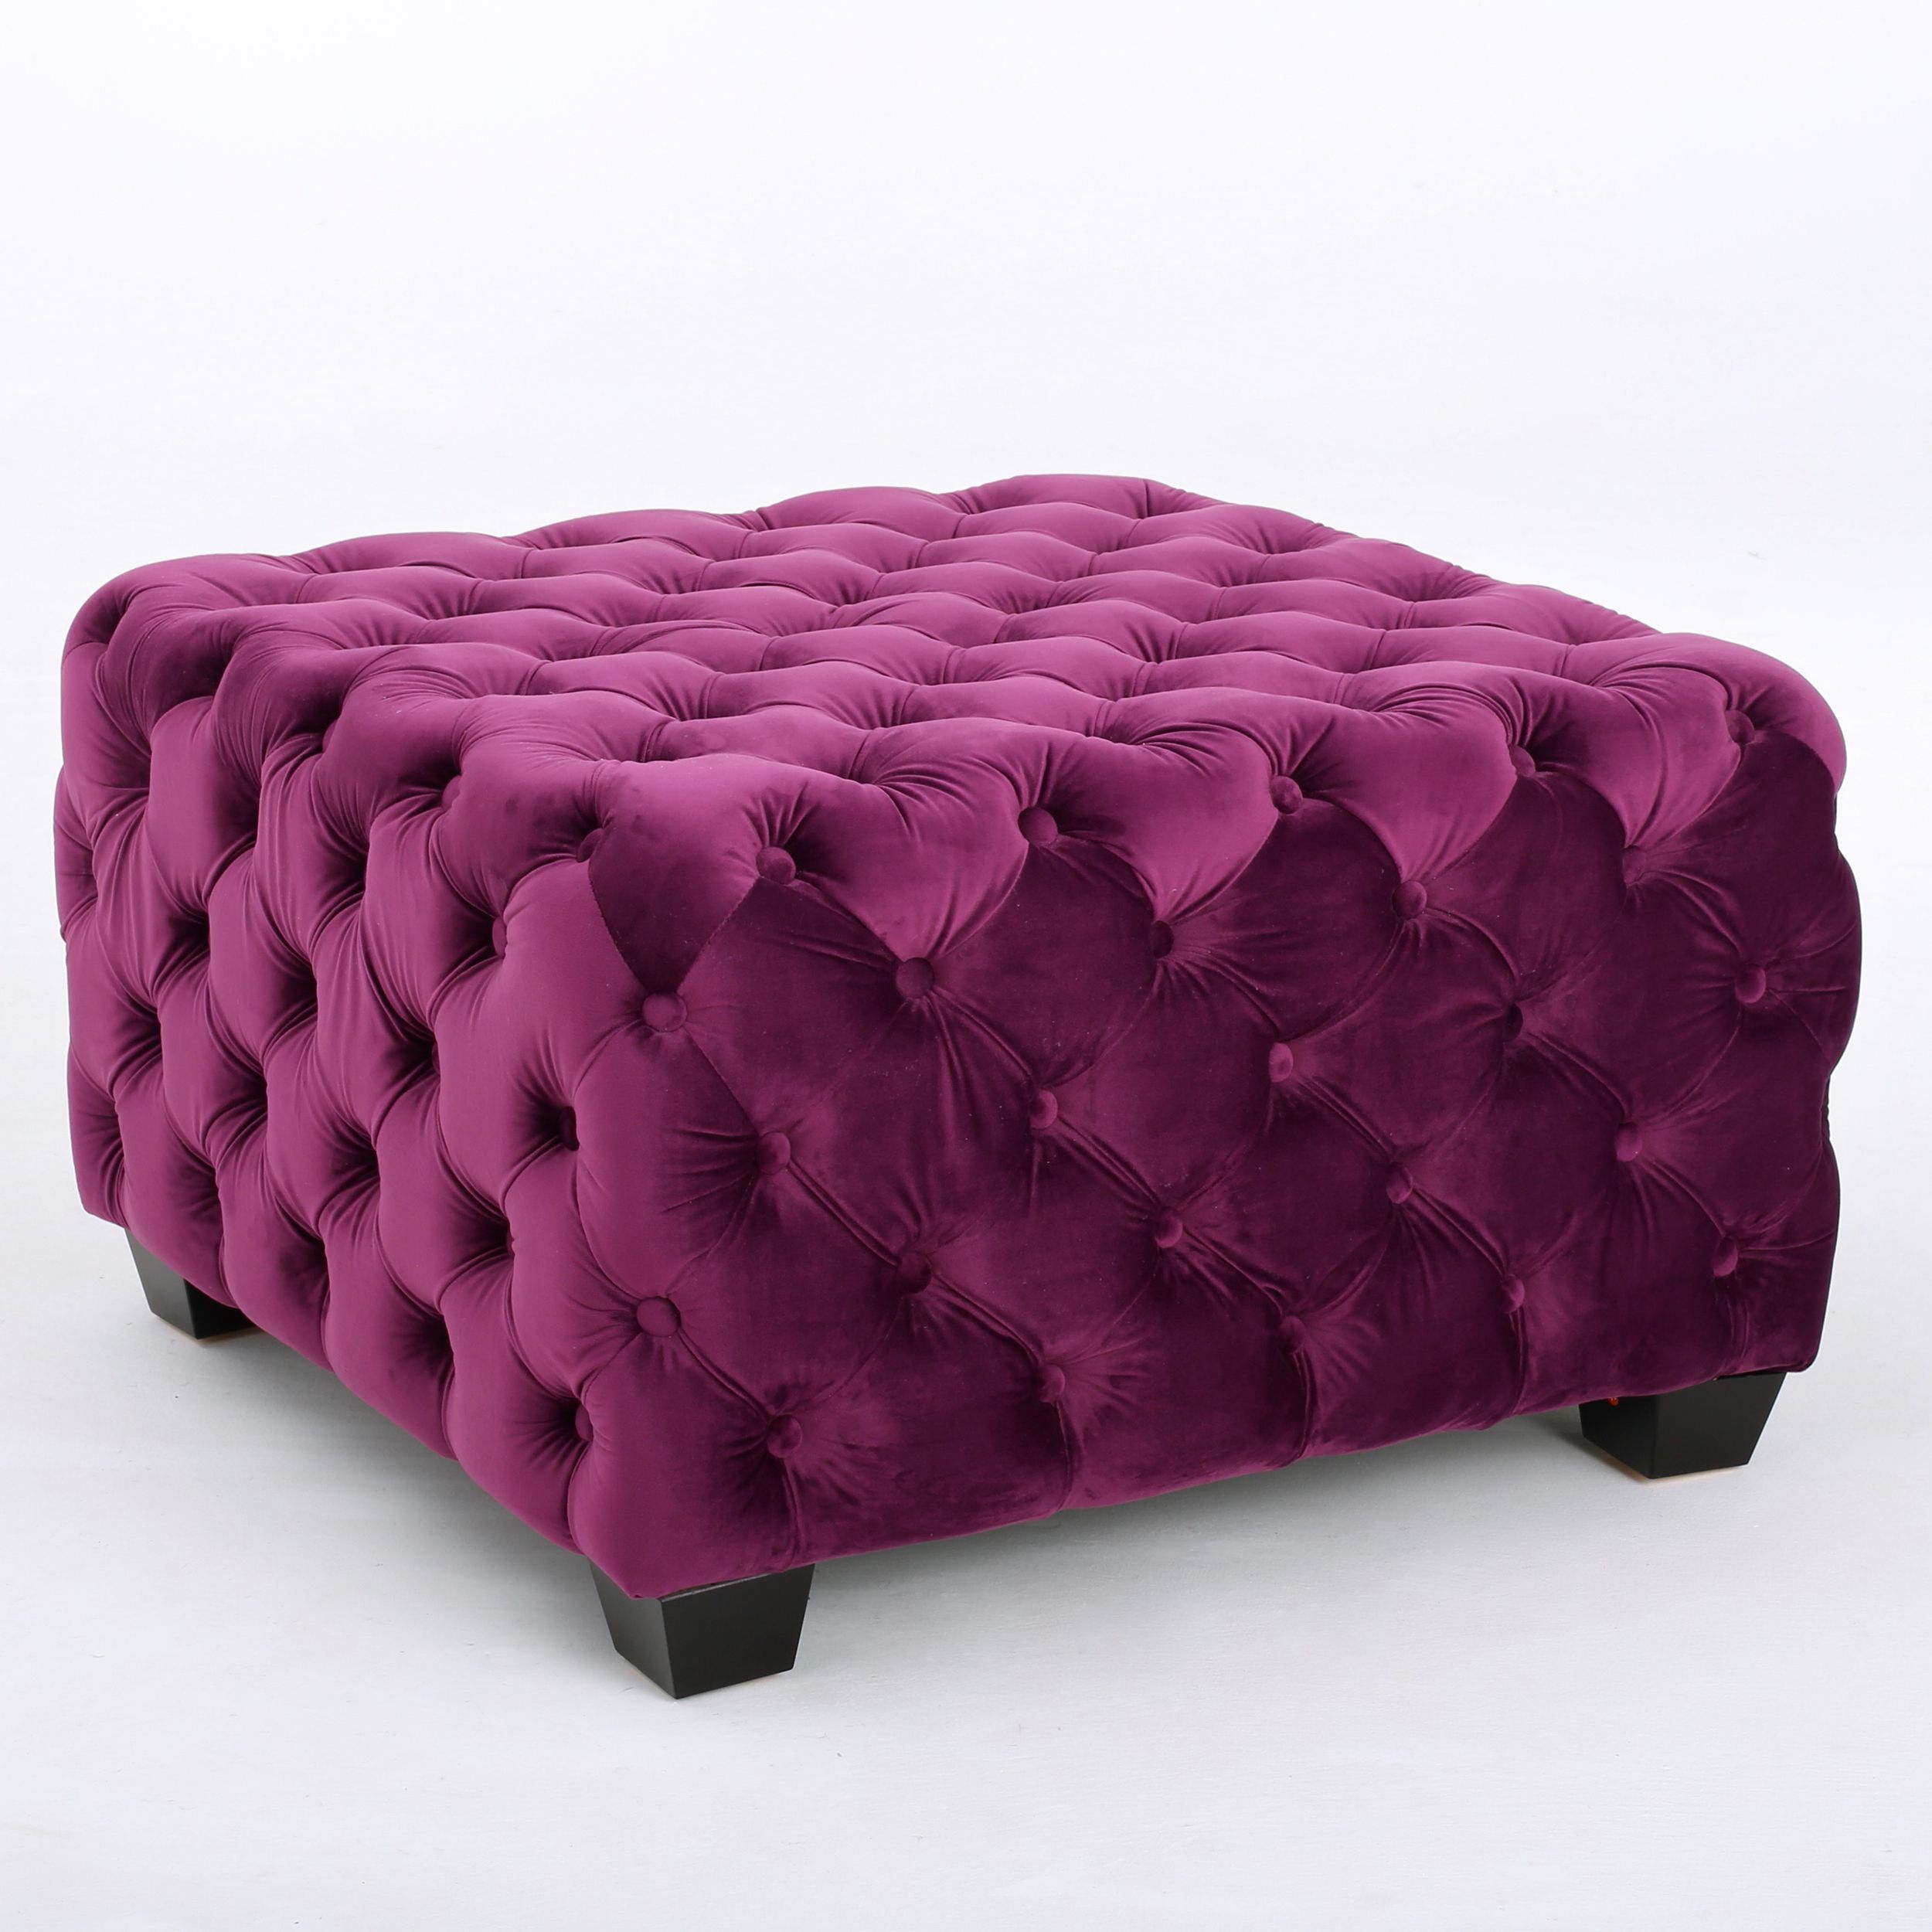 Provence Tufted Velvet Fabric Square Ottoman Bench, Fuchsia – Walmart Intended For Well Known Beige Hemp Pouf Ottomans (View 7 of 10)